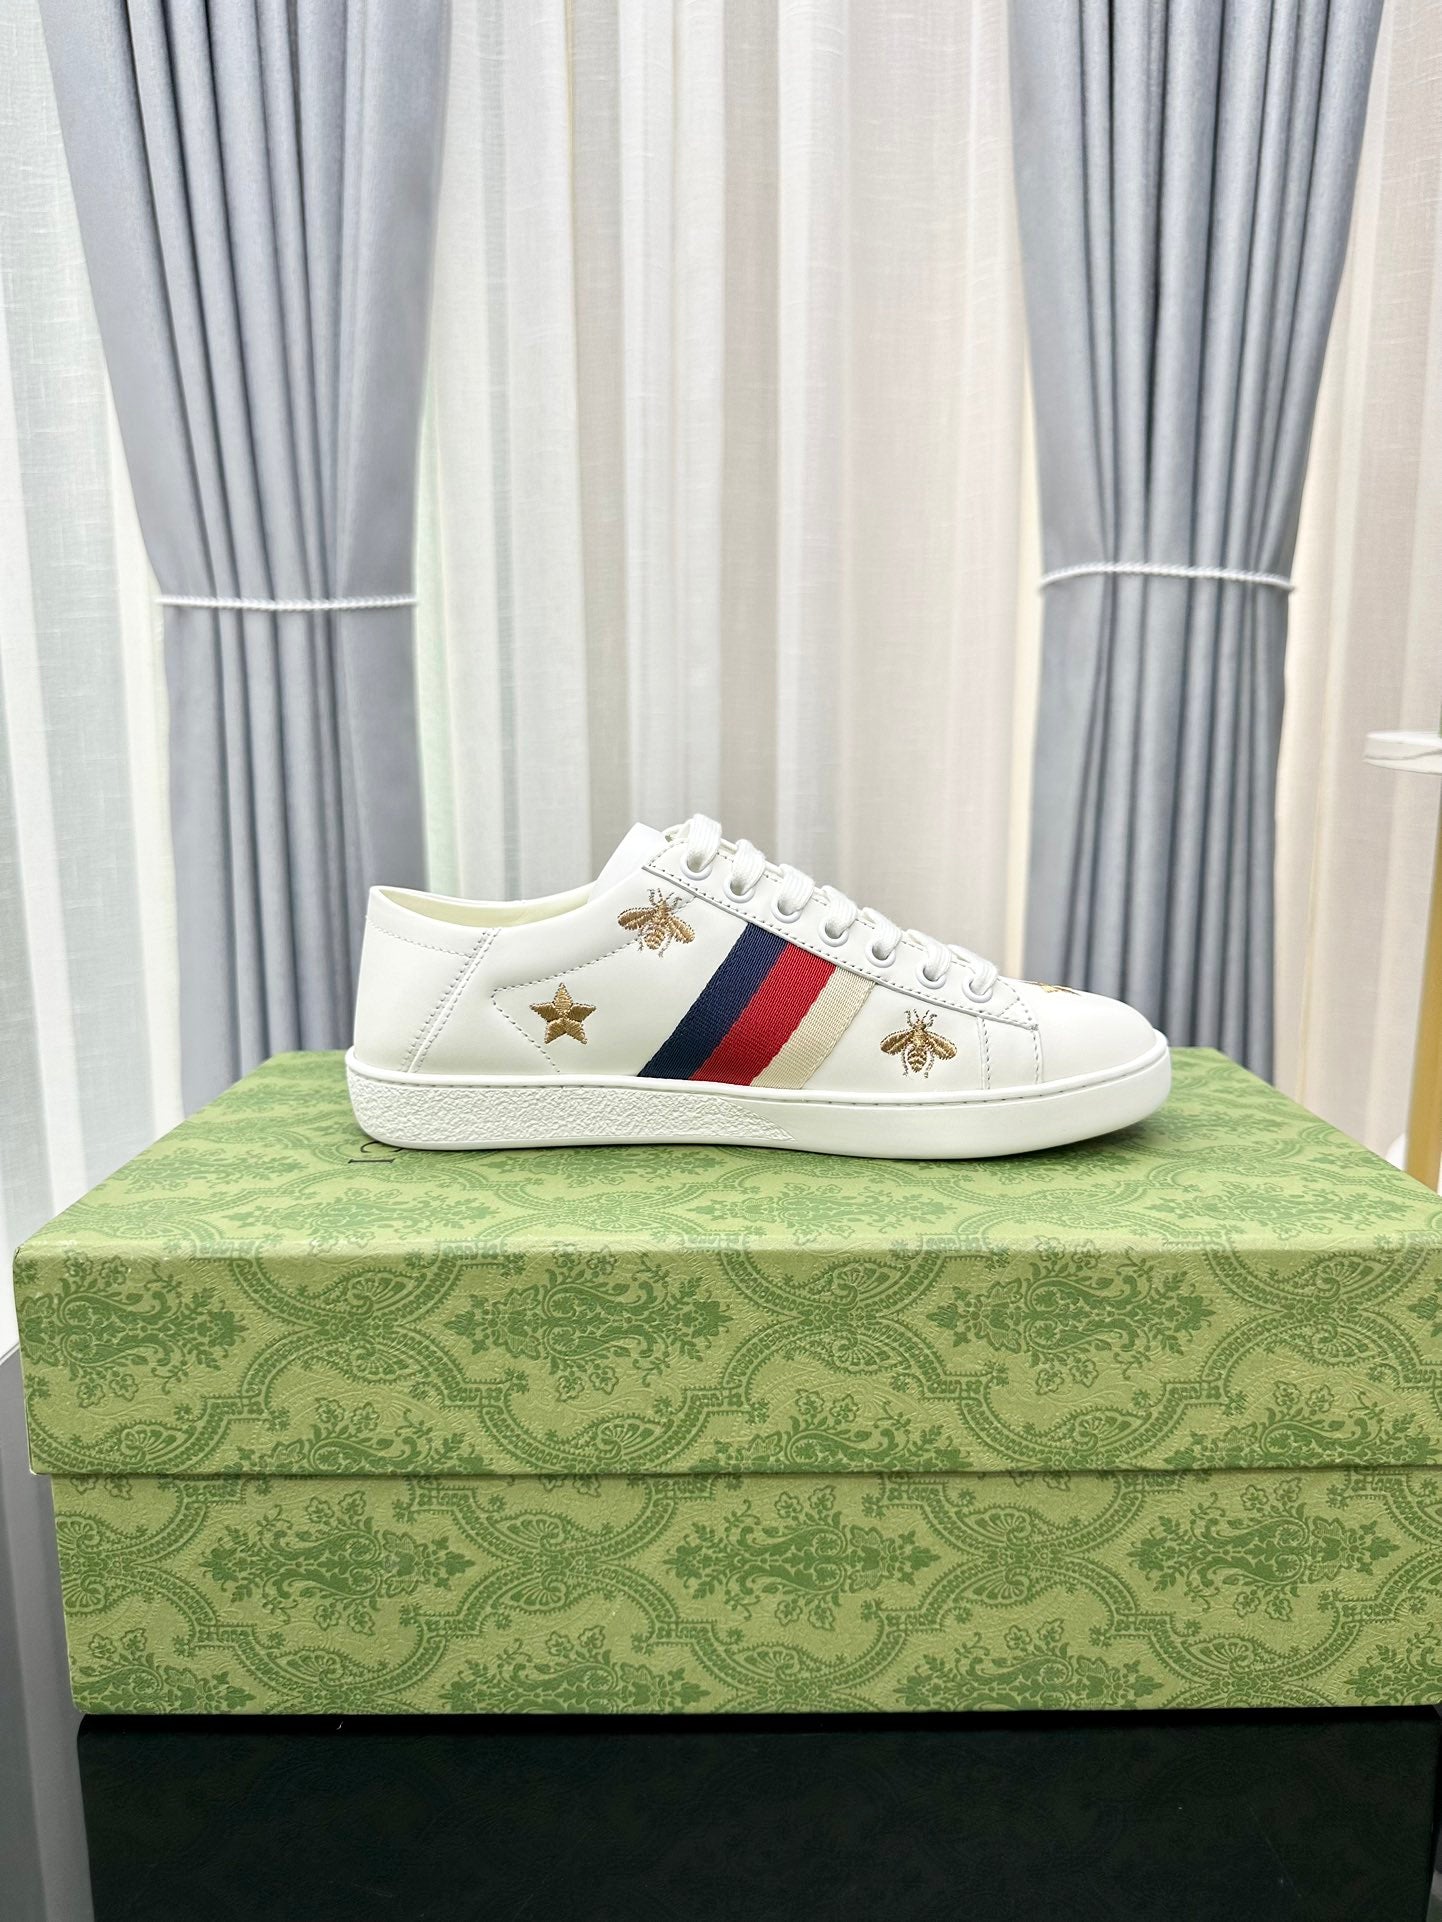 Gucci Sneakers Ace